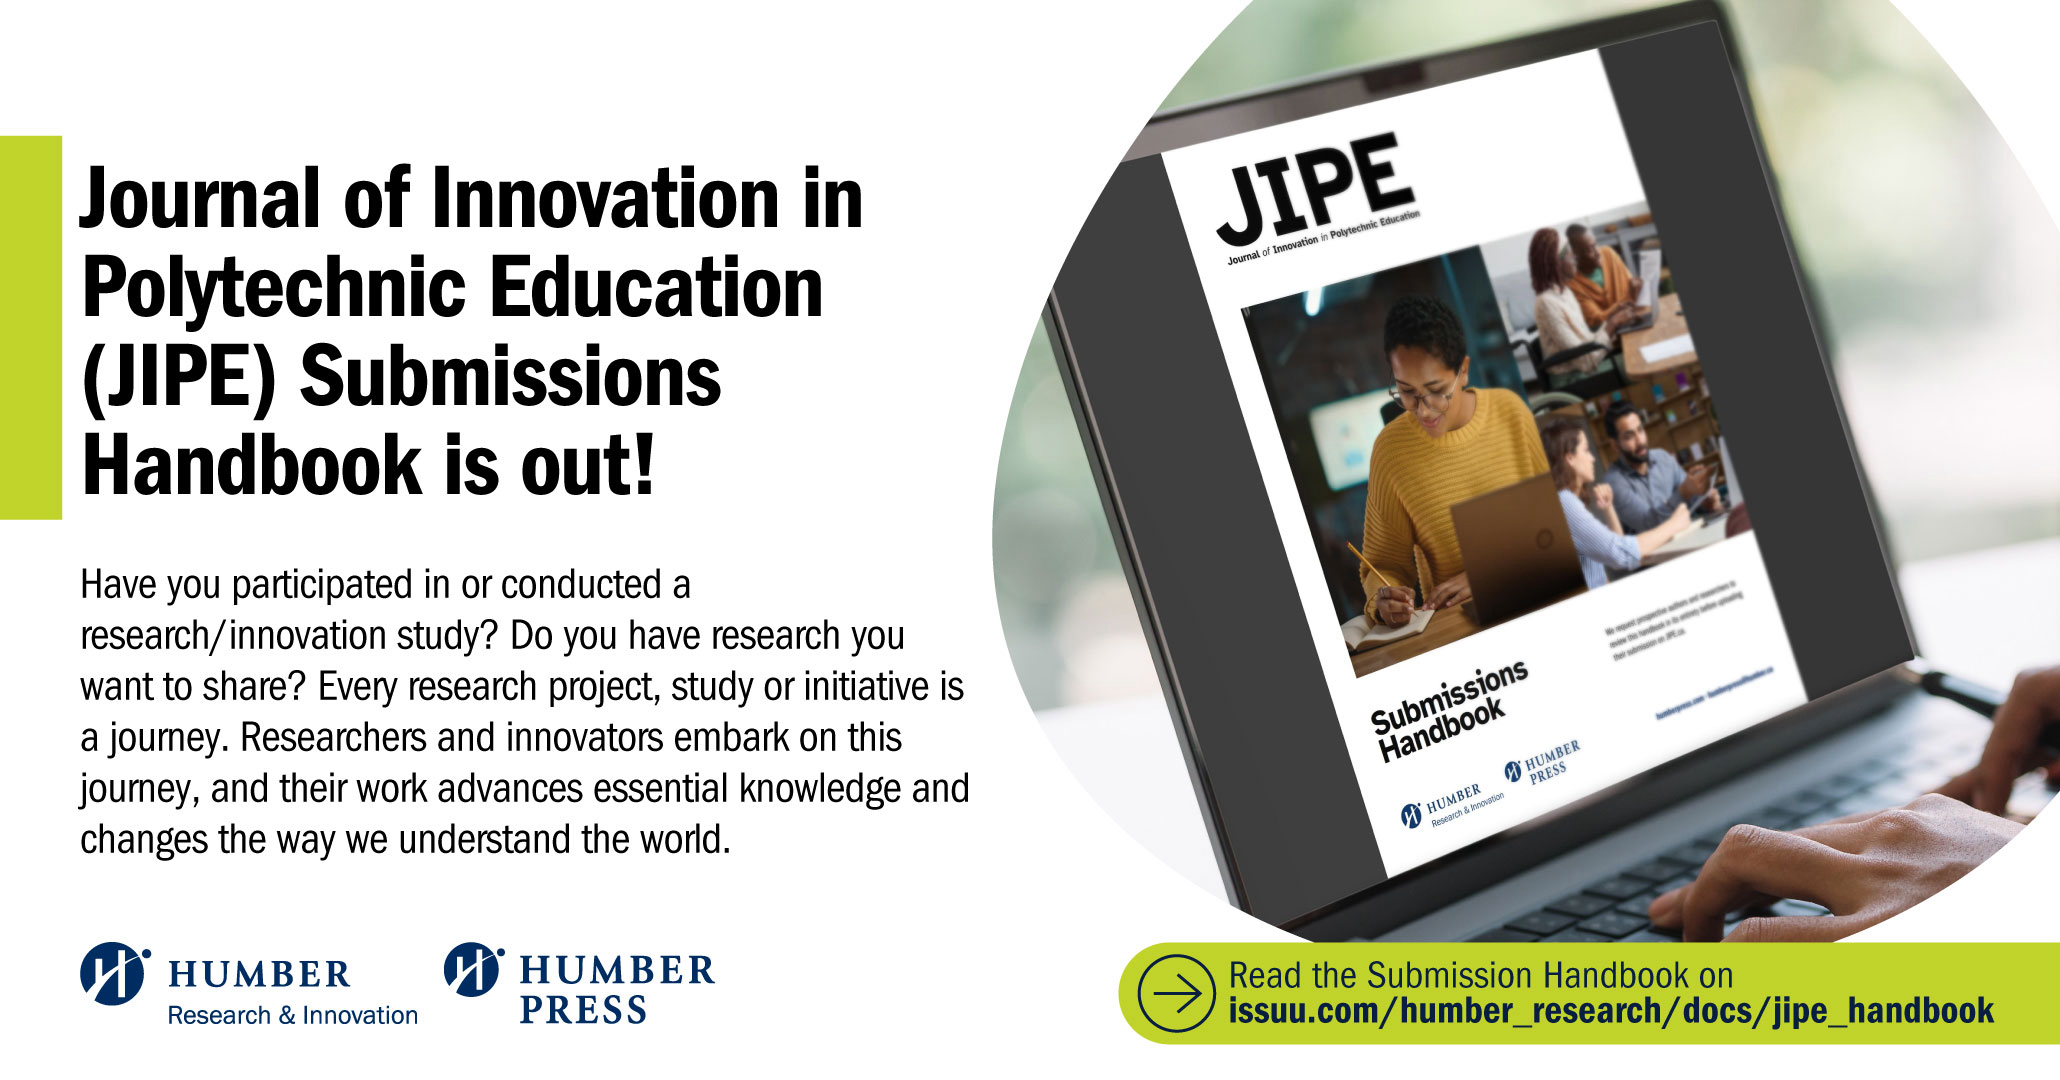 The Journal of Innovation in Polytechnic Education (JIPE) Submissions Handbook is out